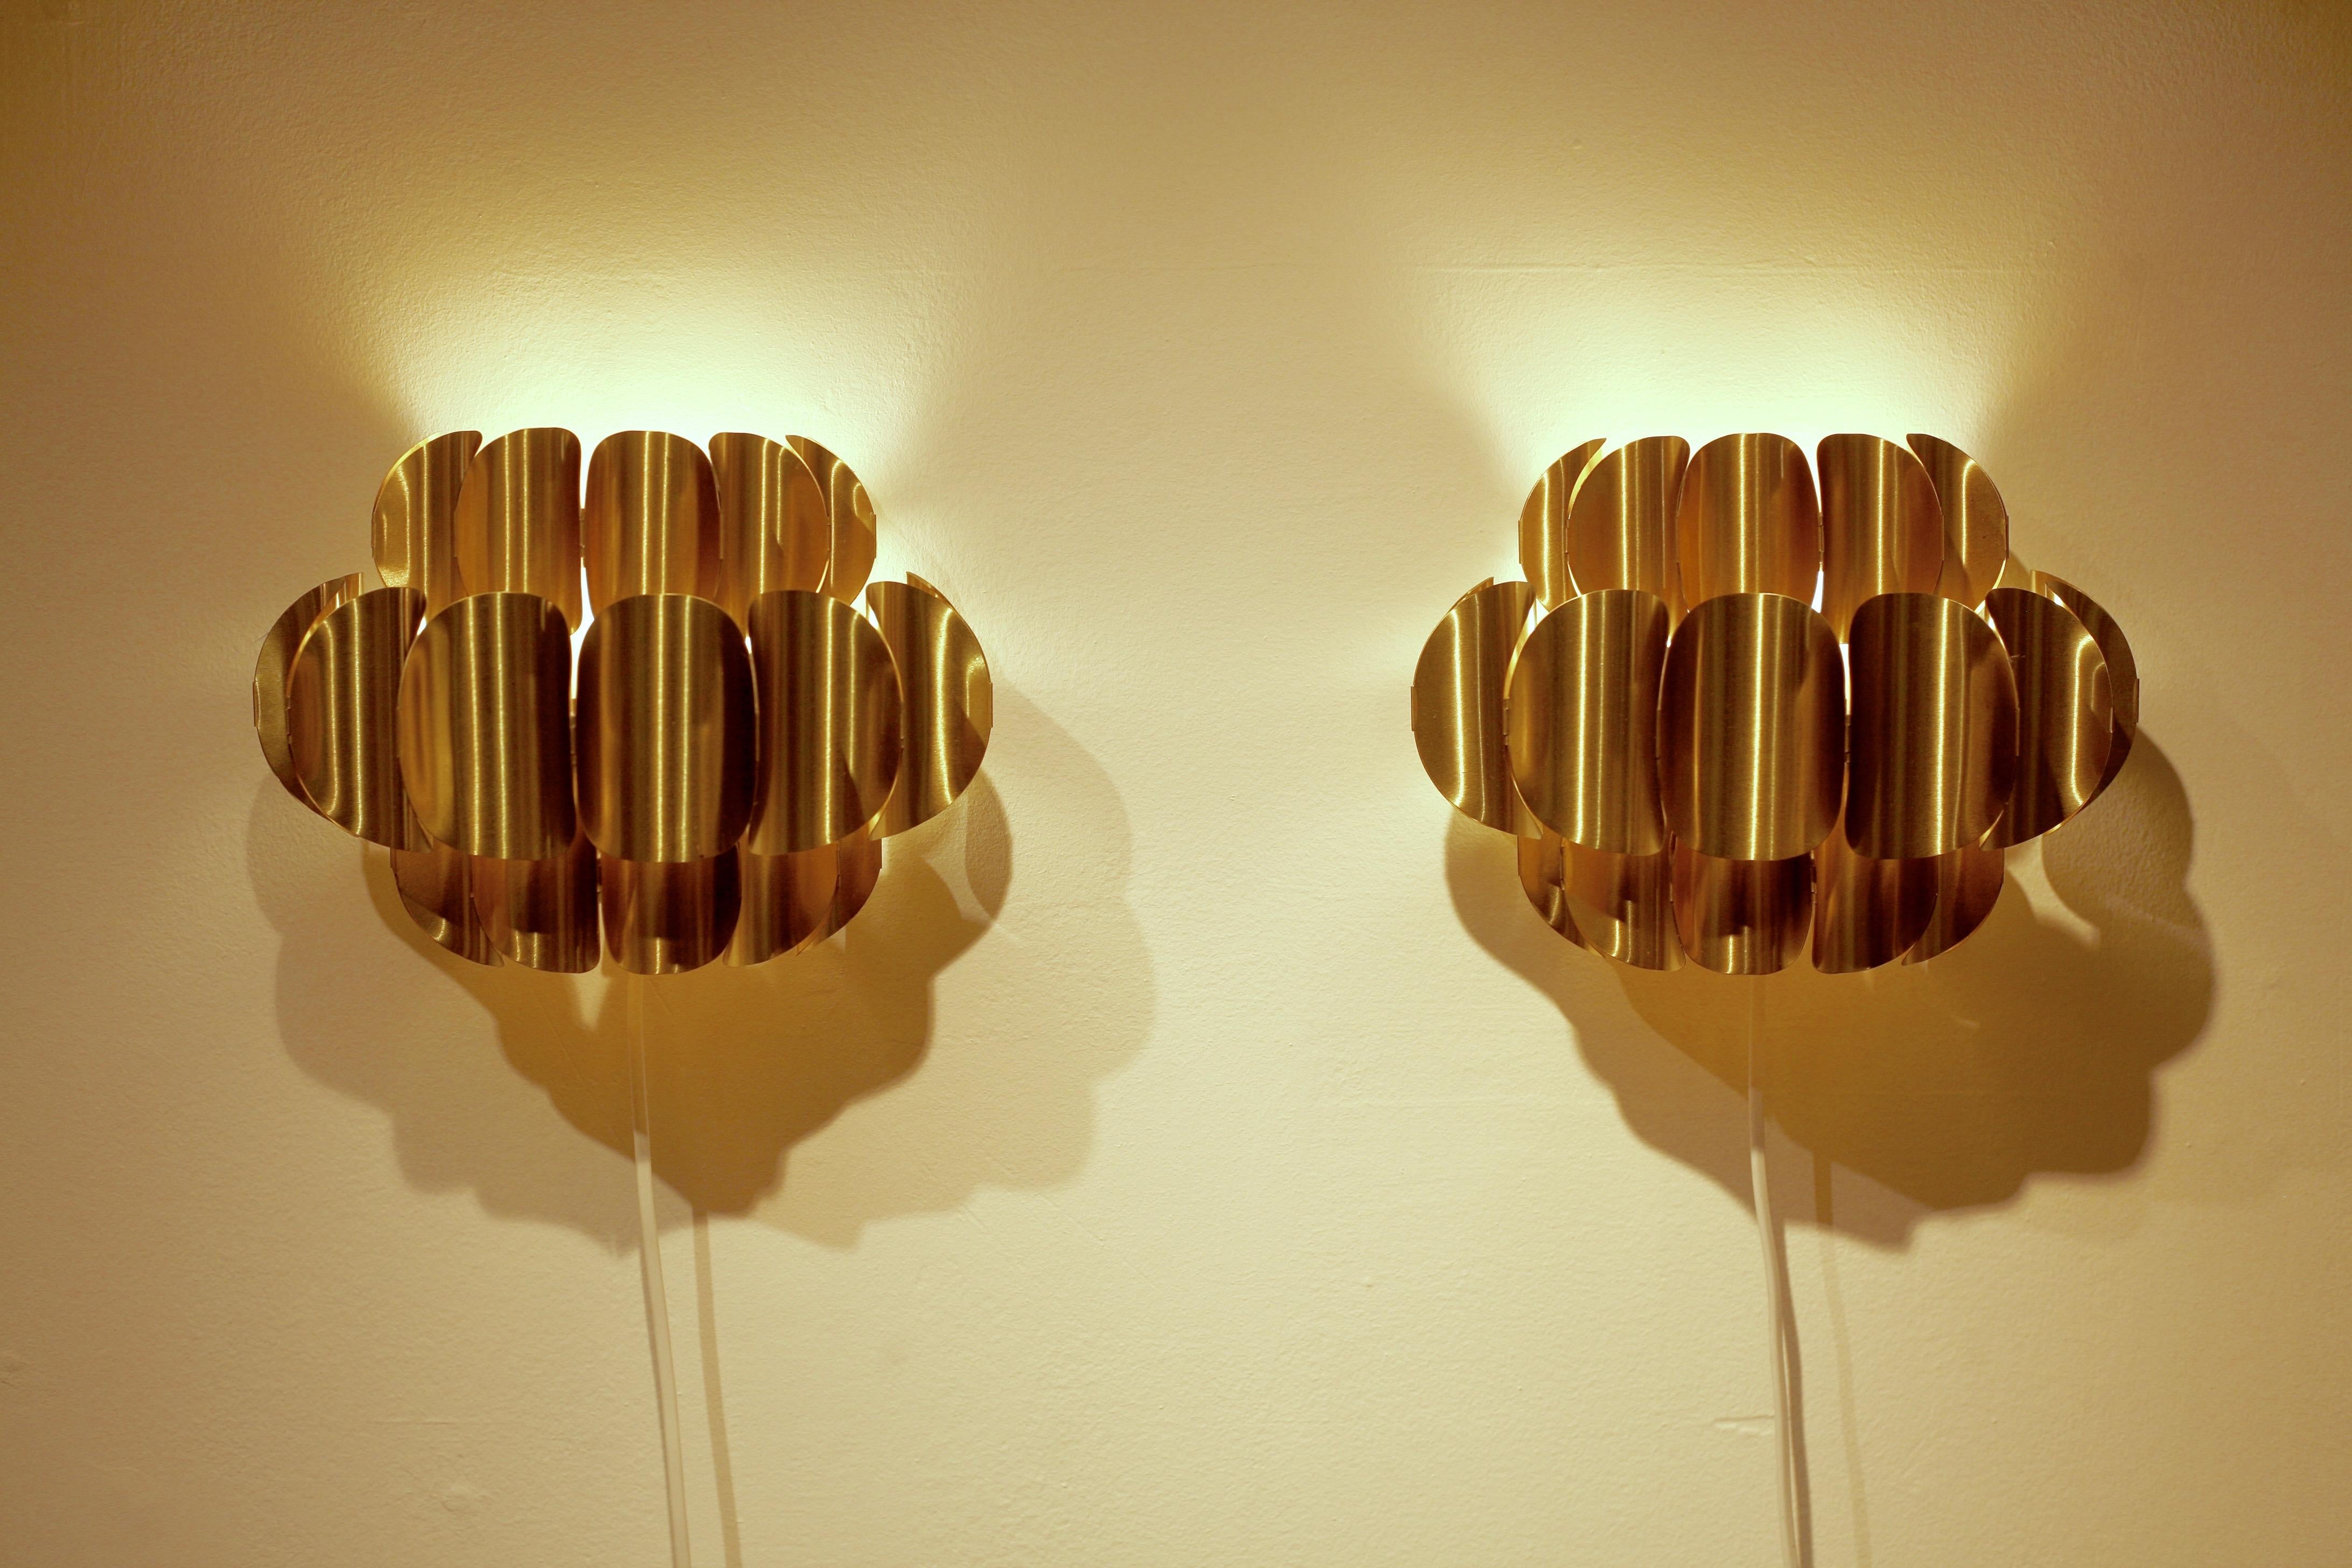 A set of 2 brass wall sconces, modell COR 74, designed by Werner Schou for Coronell Elektro. These are sometimes attributed to Hans-Agne Jakobsson.